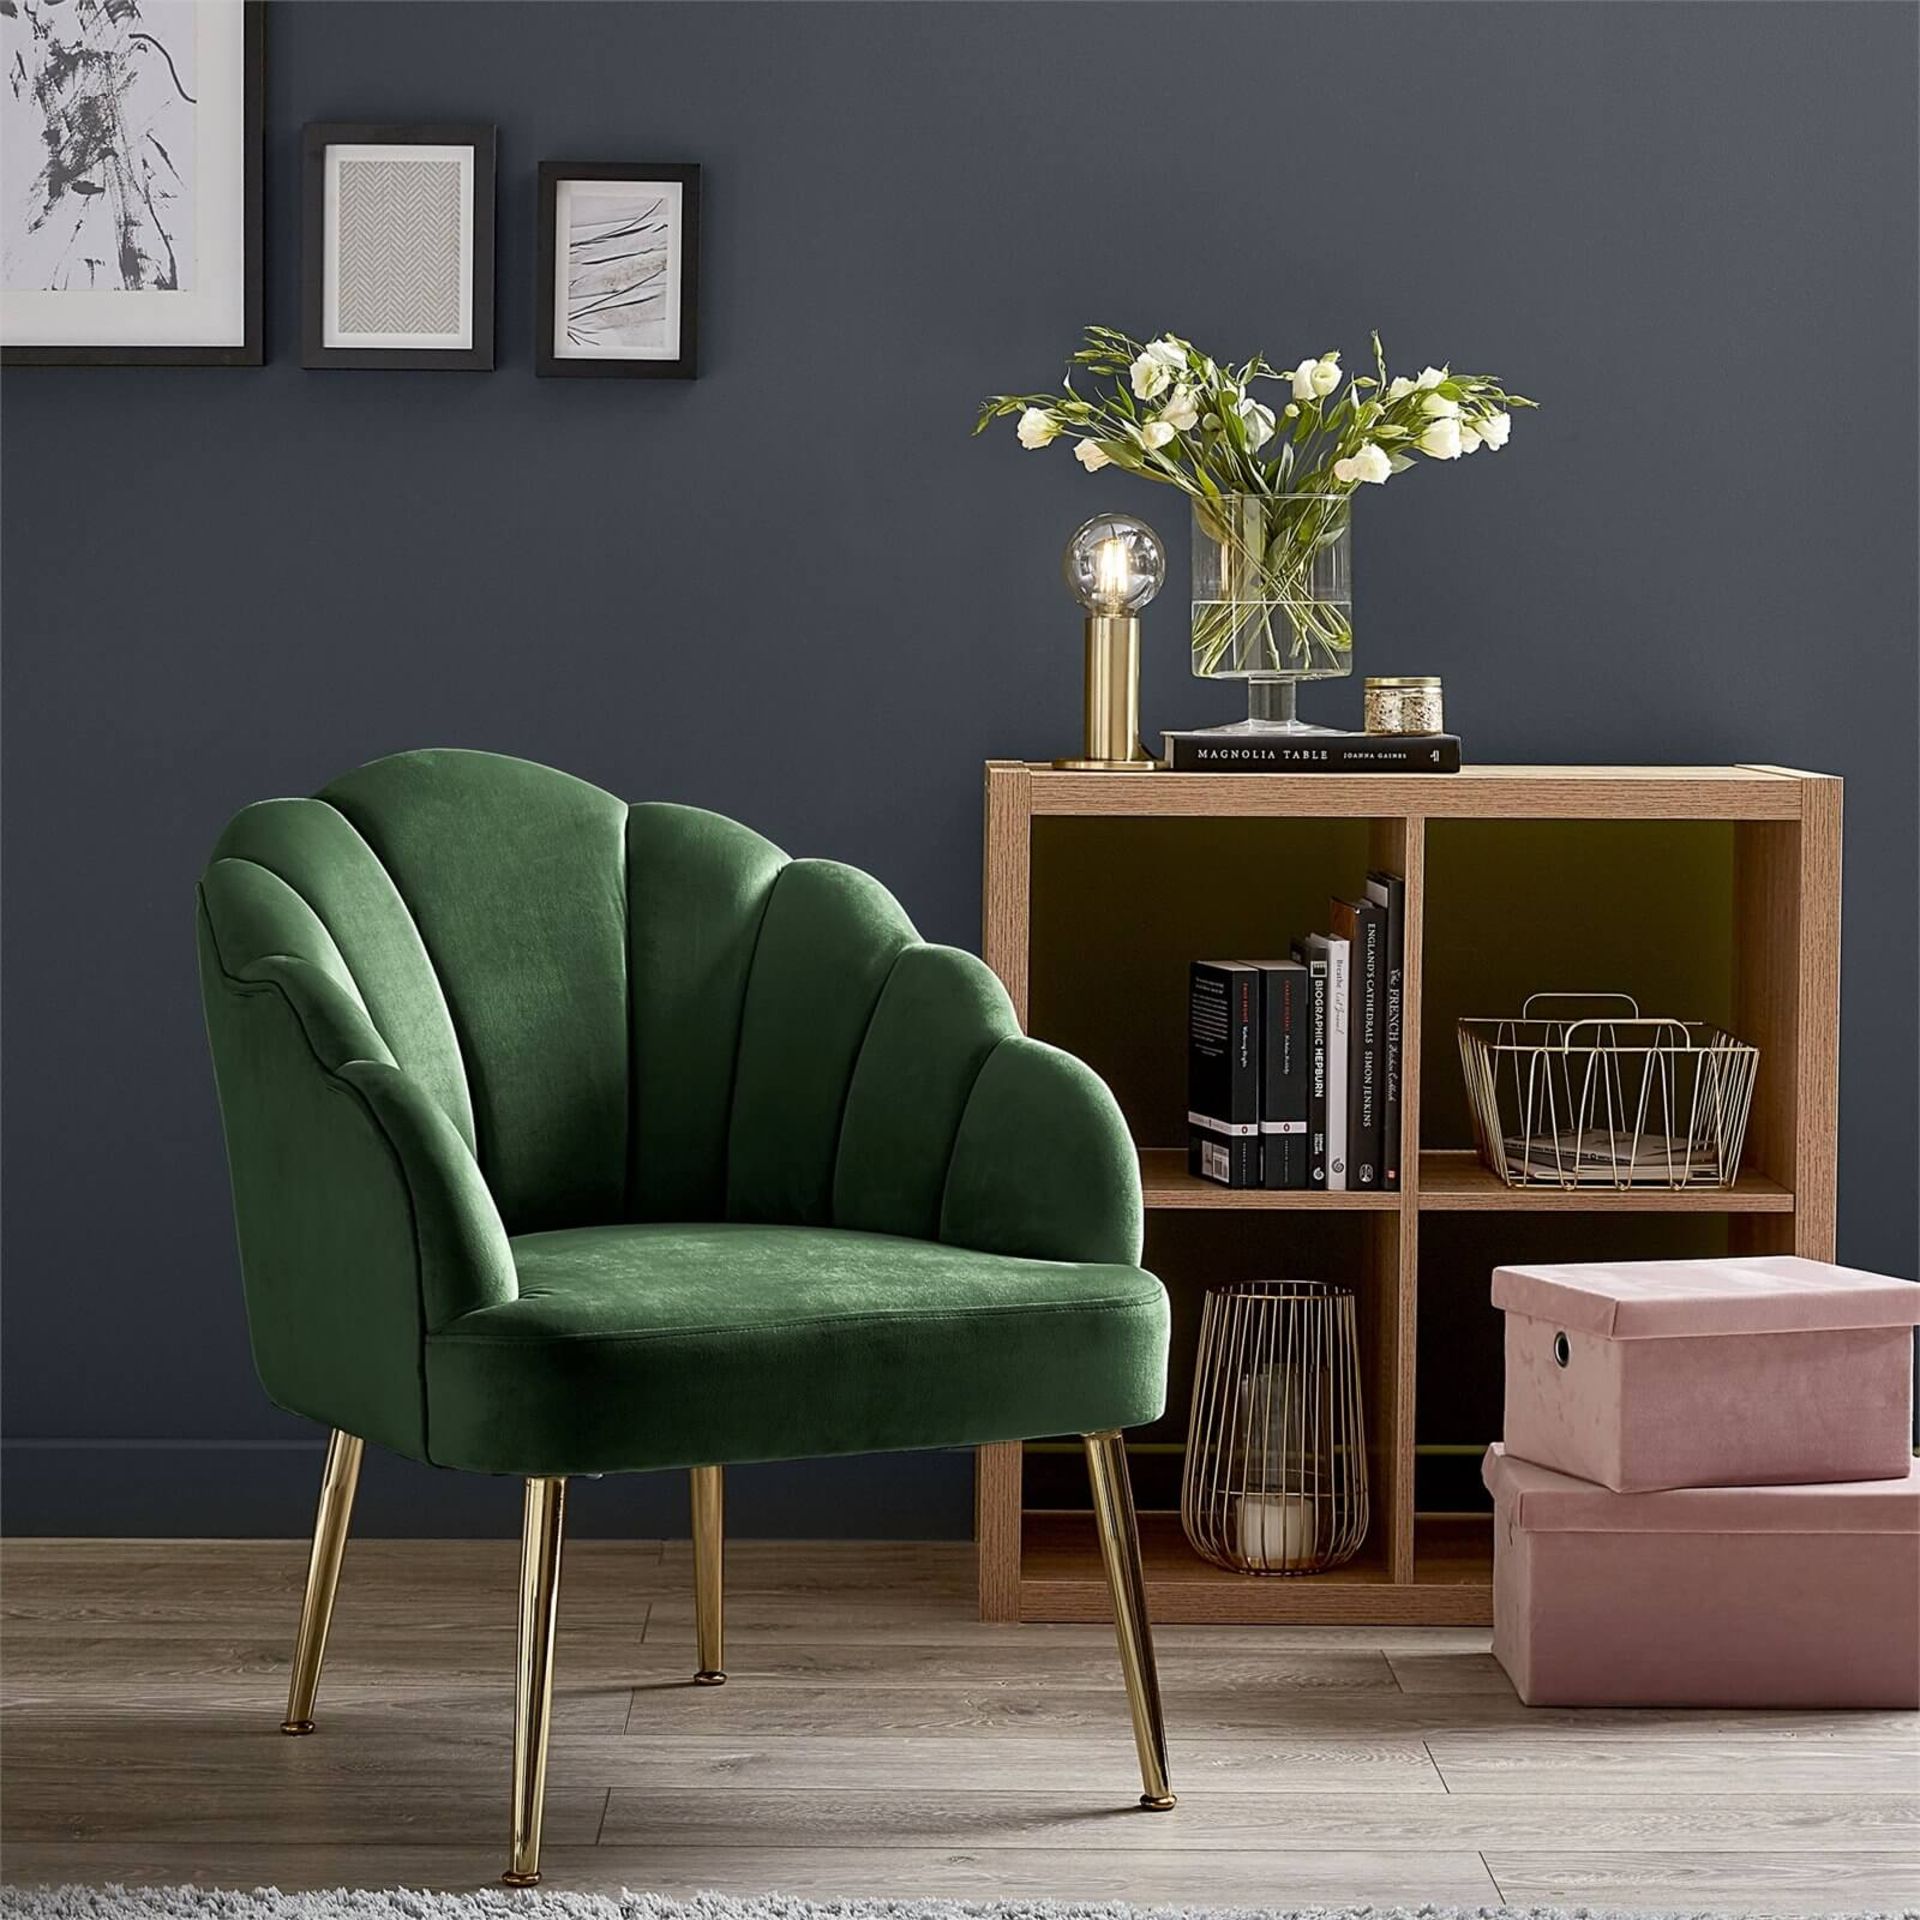 (R6J) 1 X Occasional Chair Emerald. Velvet Cover With Rubberwood Legs (H72xW60xD70cm) - Image 2 of 4